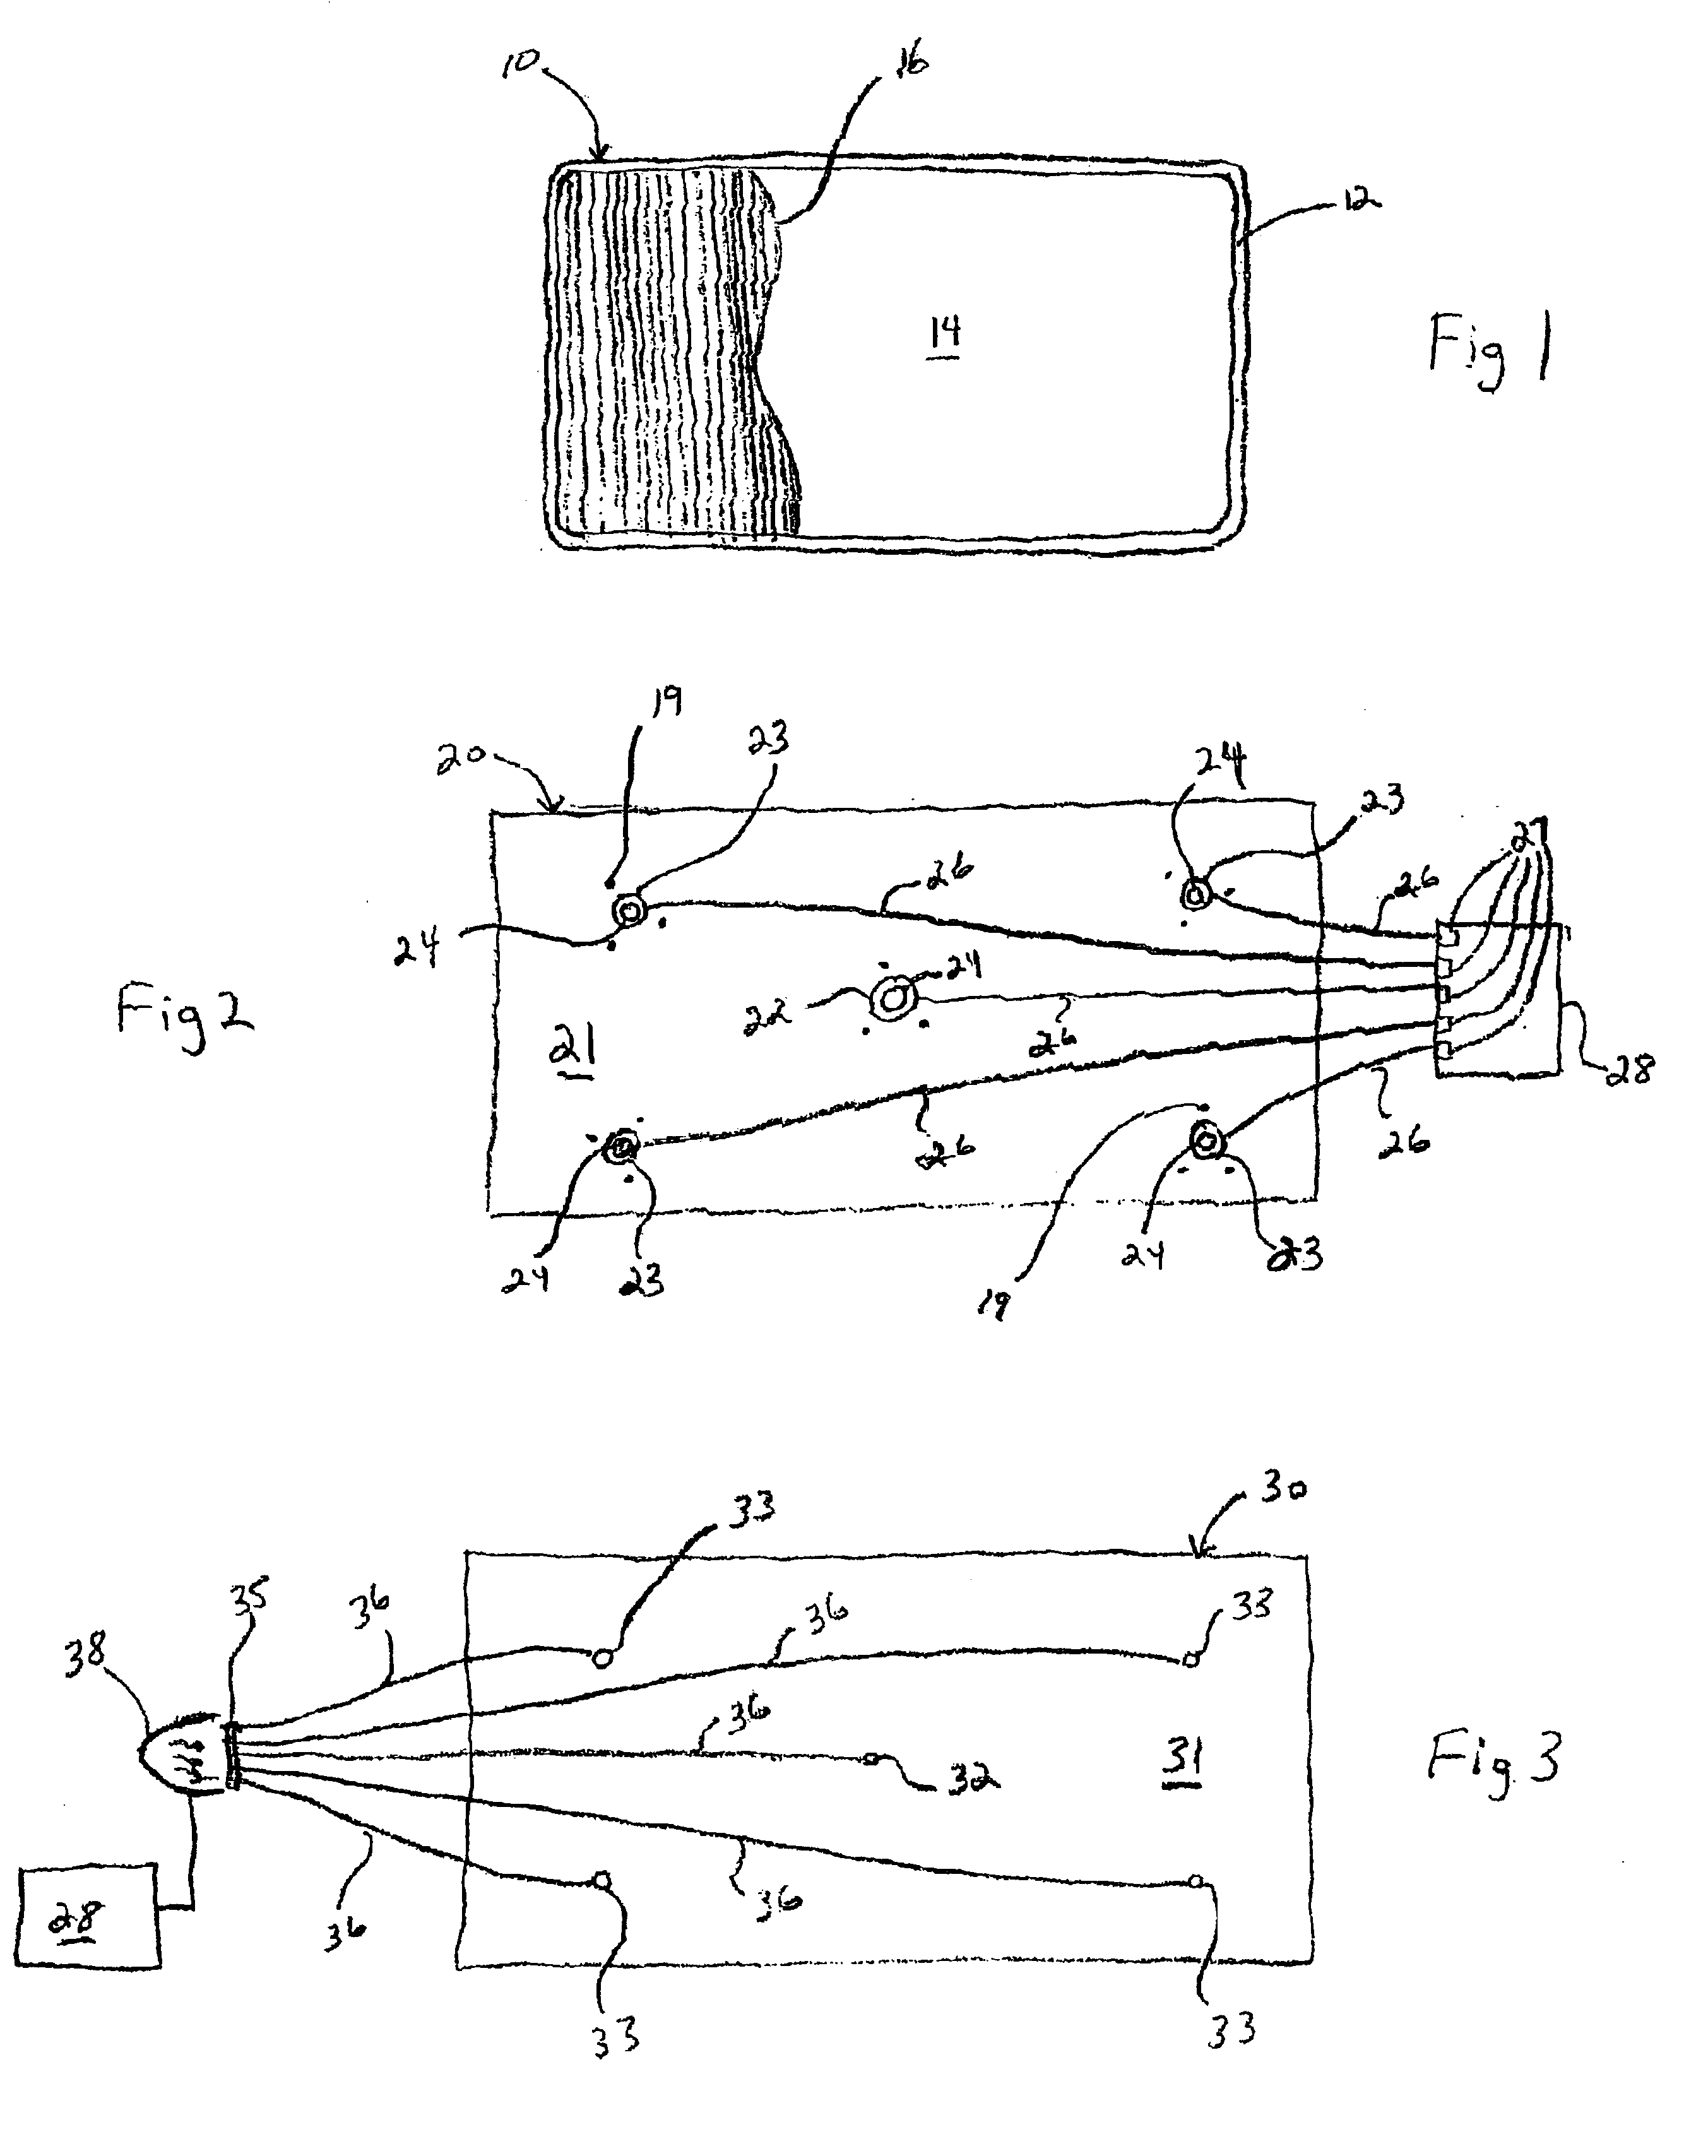 Apparatus and method for monitoring of cathode ray tube panel manufacturing to reduce CRT cost and improve performance and yield